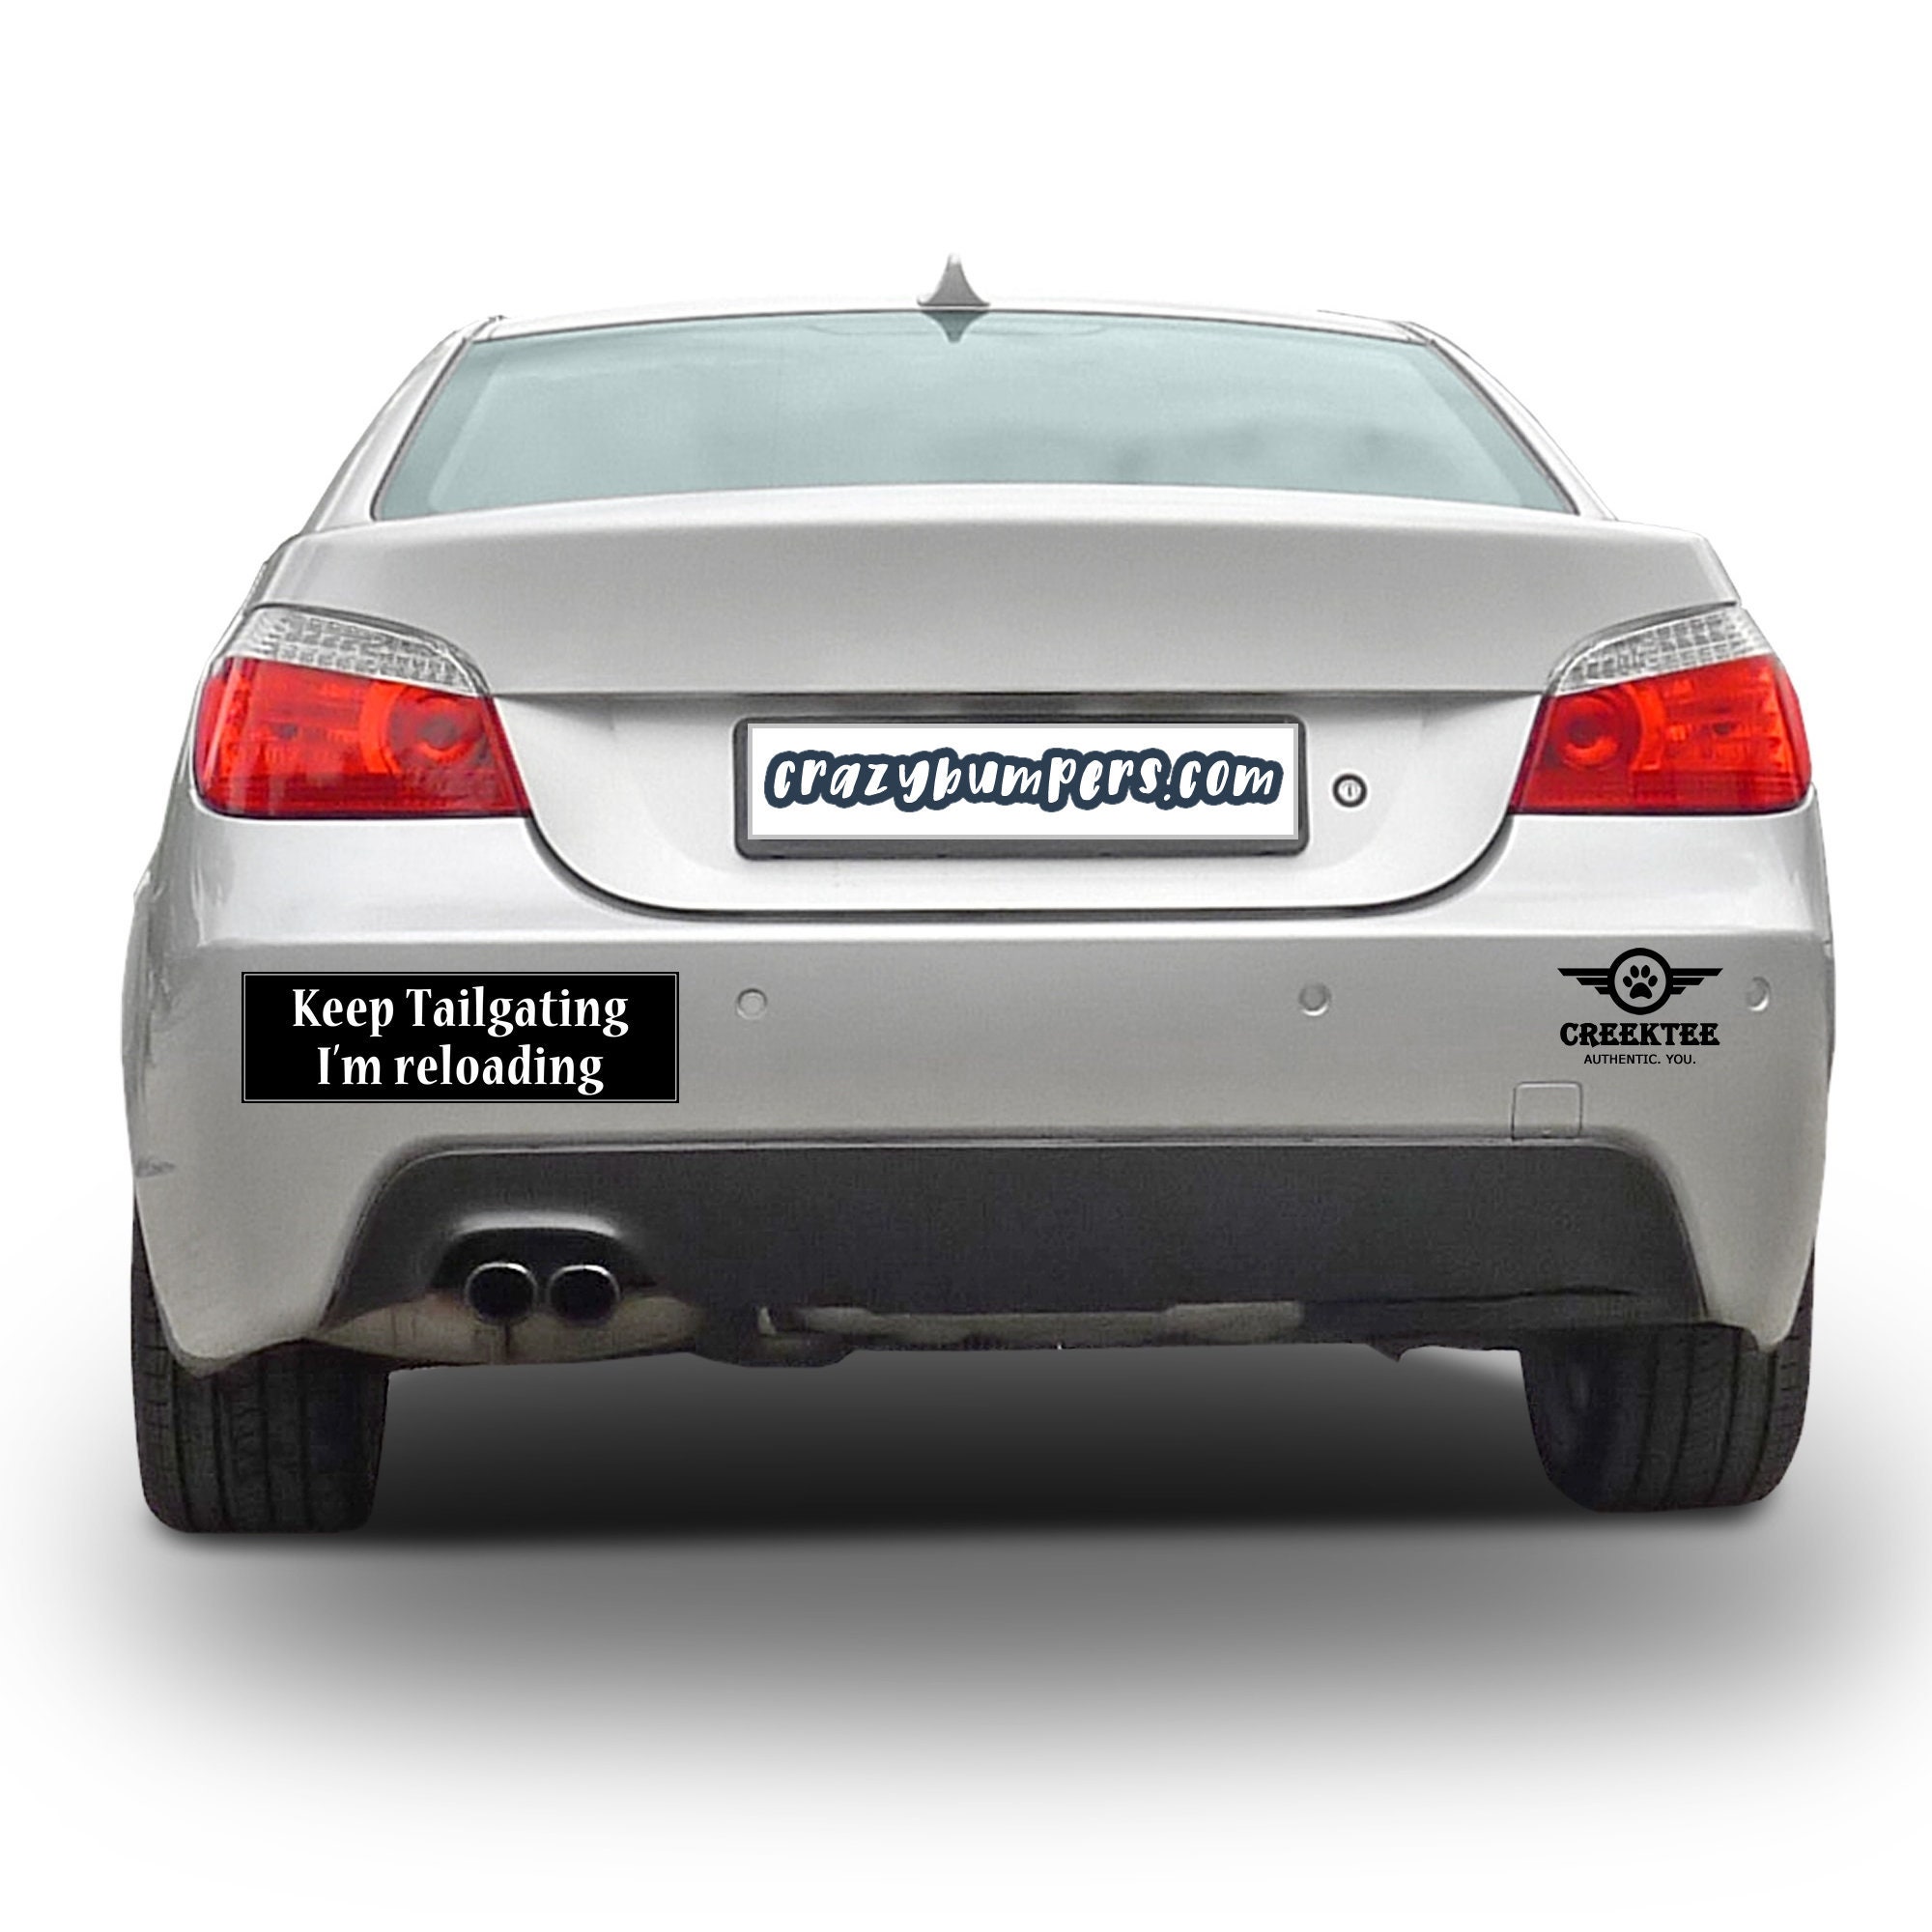 Keep Tailgating I'm Reloading 10 x 3 Bumper Sticker - Custom changes and orders welcomed!